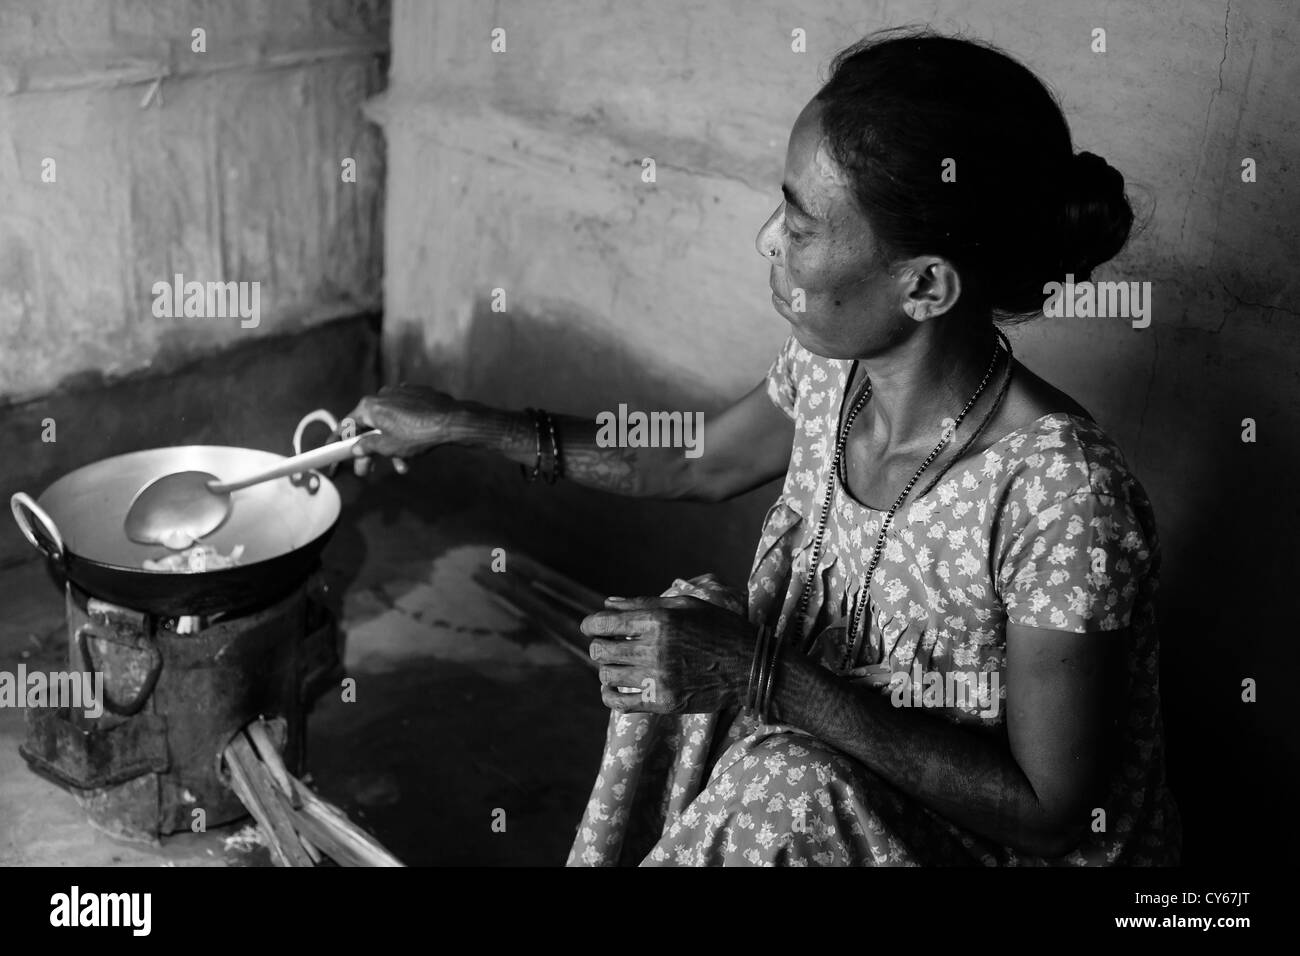 Local woman cooking in typical village kitchen, Goutali village, Chitwan National Park, Nepal Stock Photo